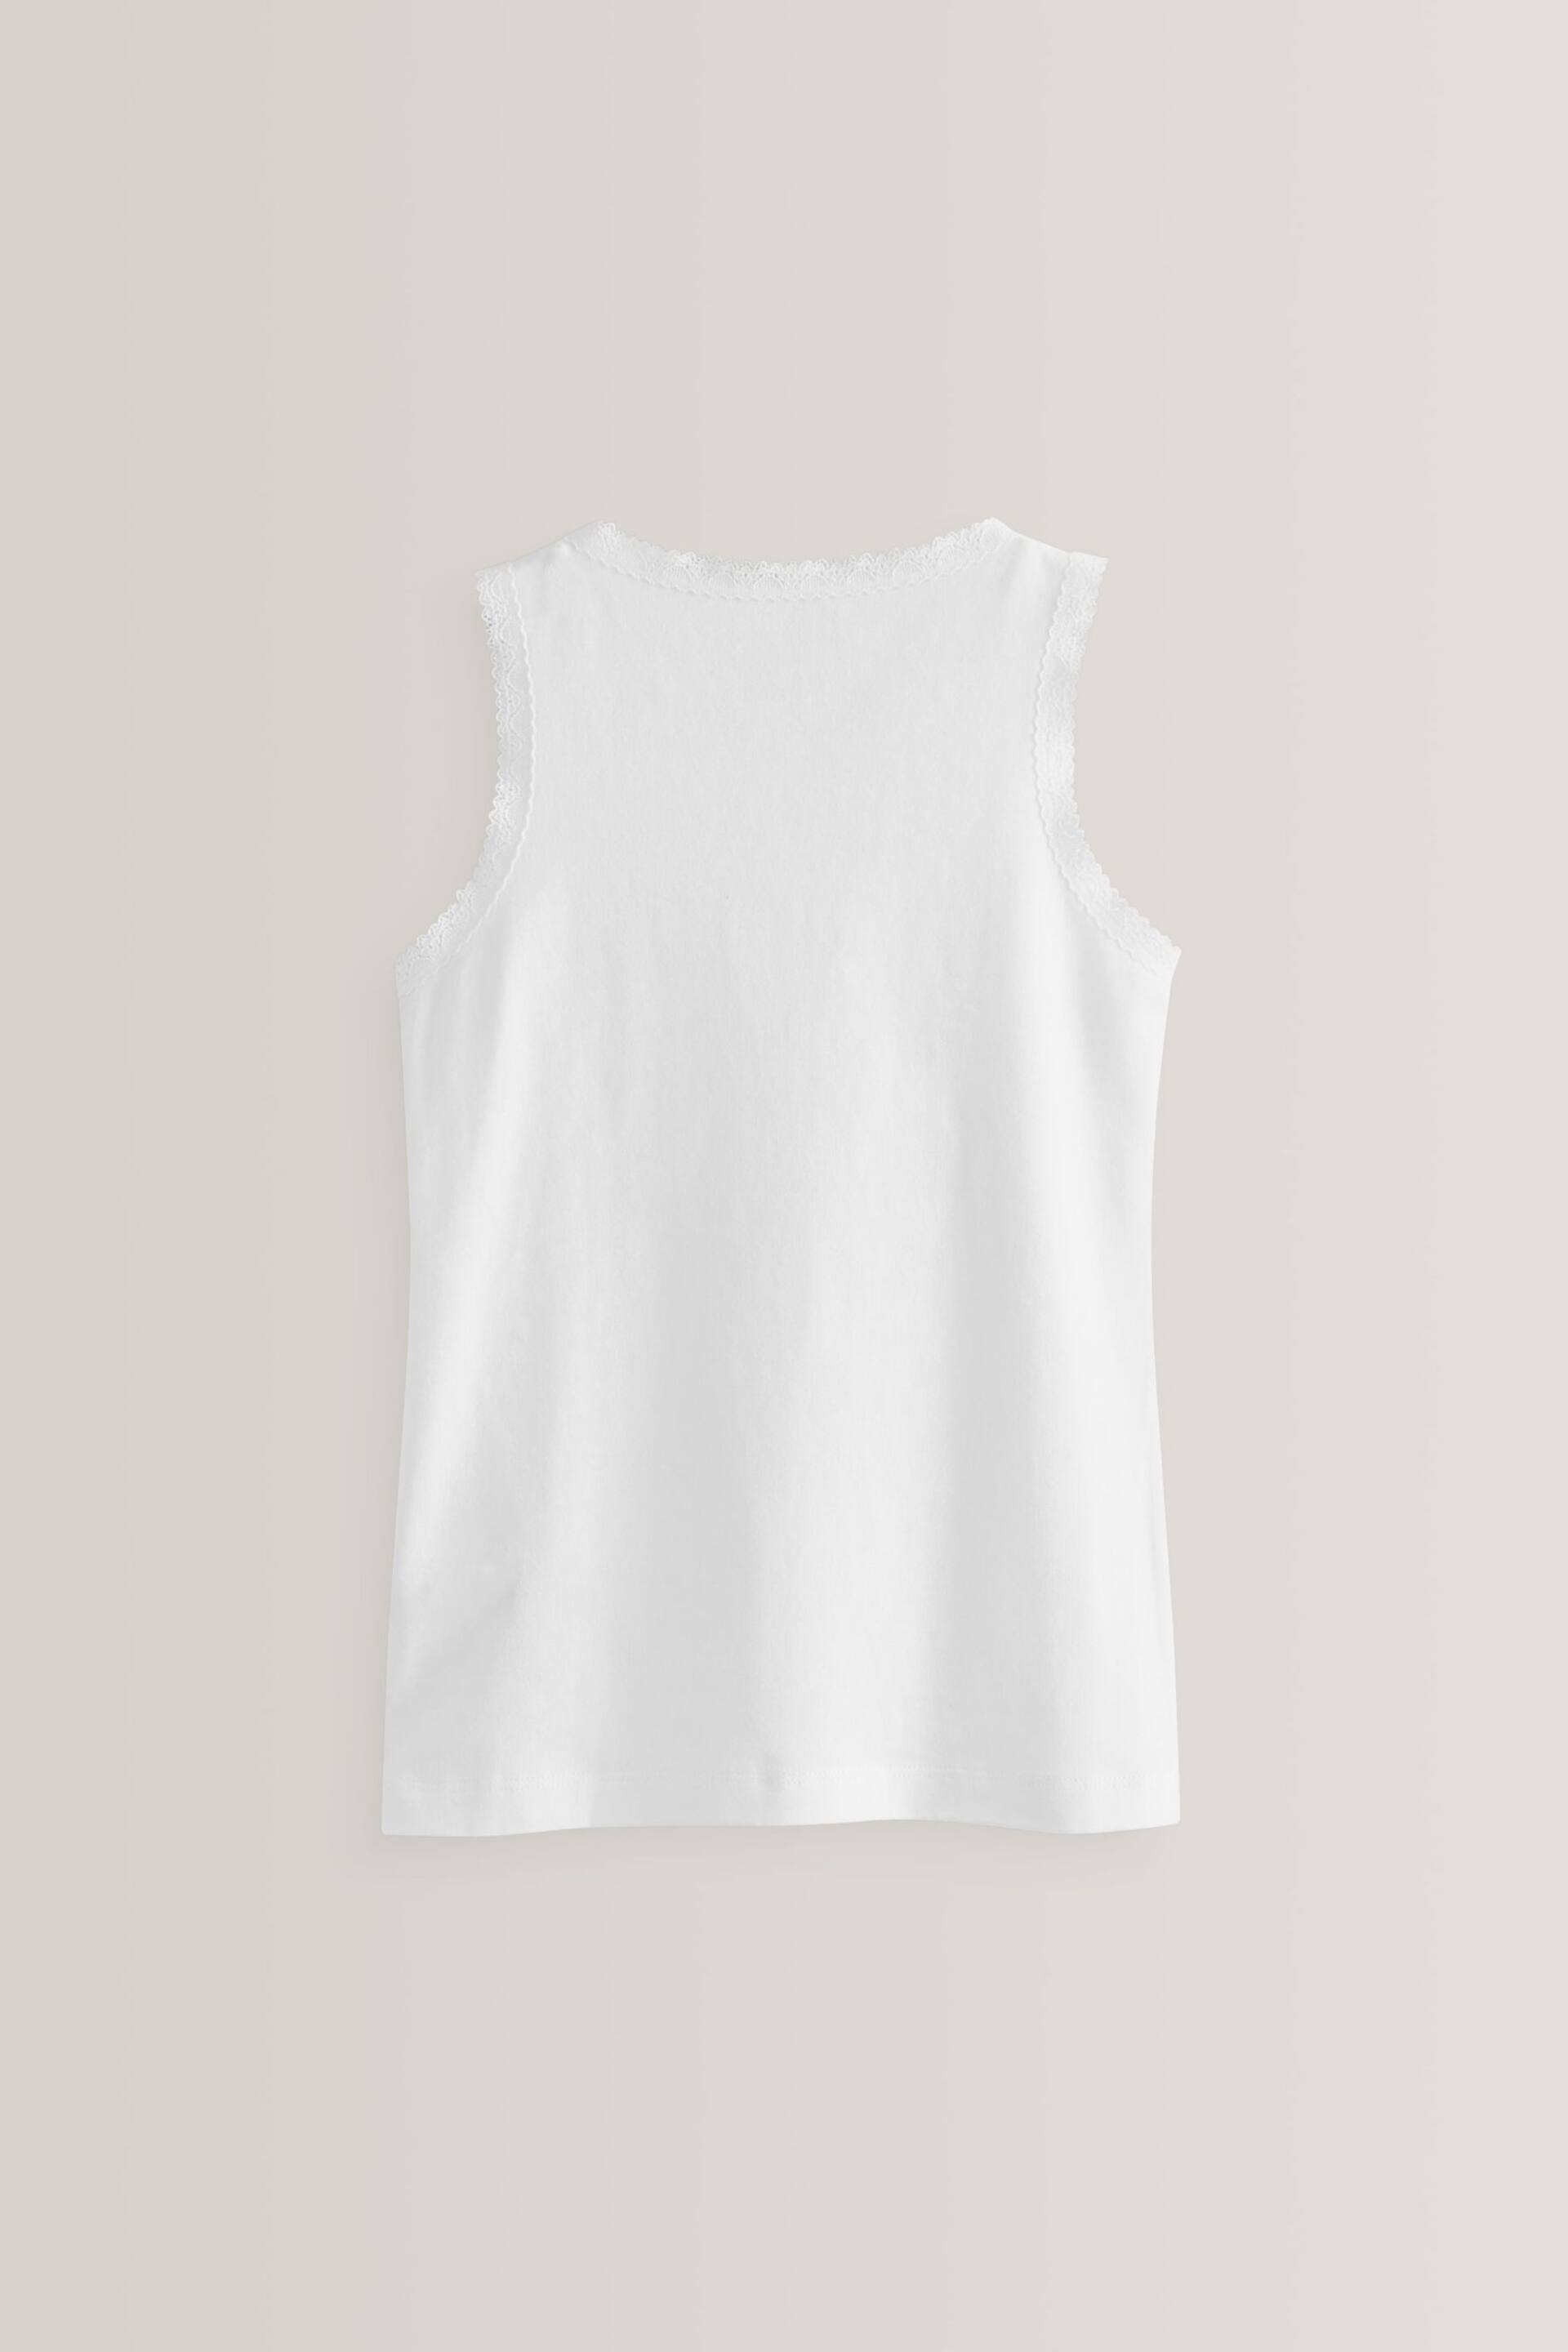 White Lace Vests 3 Pack (1.5-16yrs) - Image 3 of 3